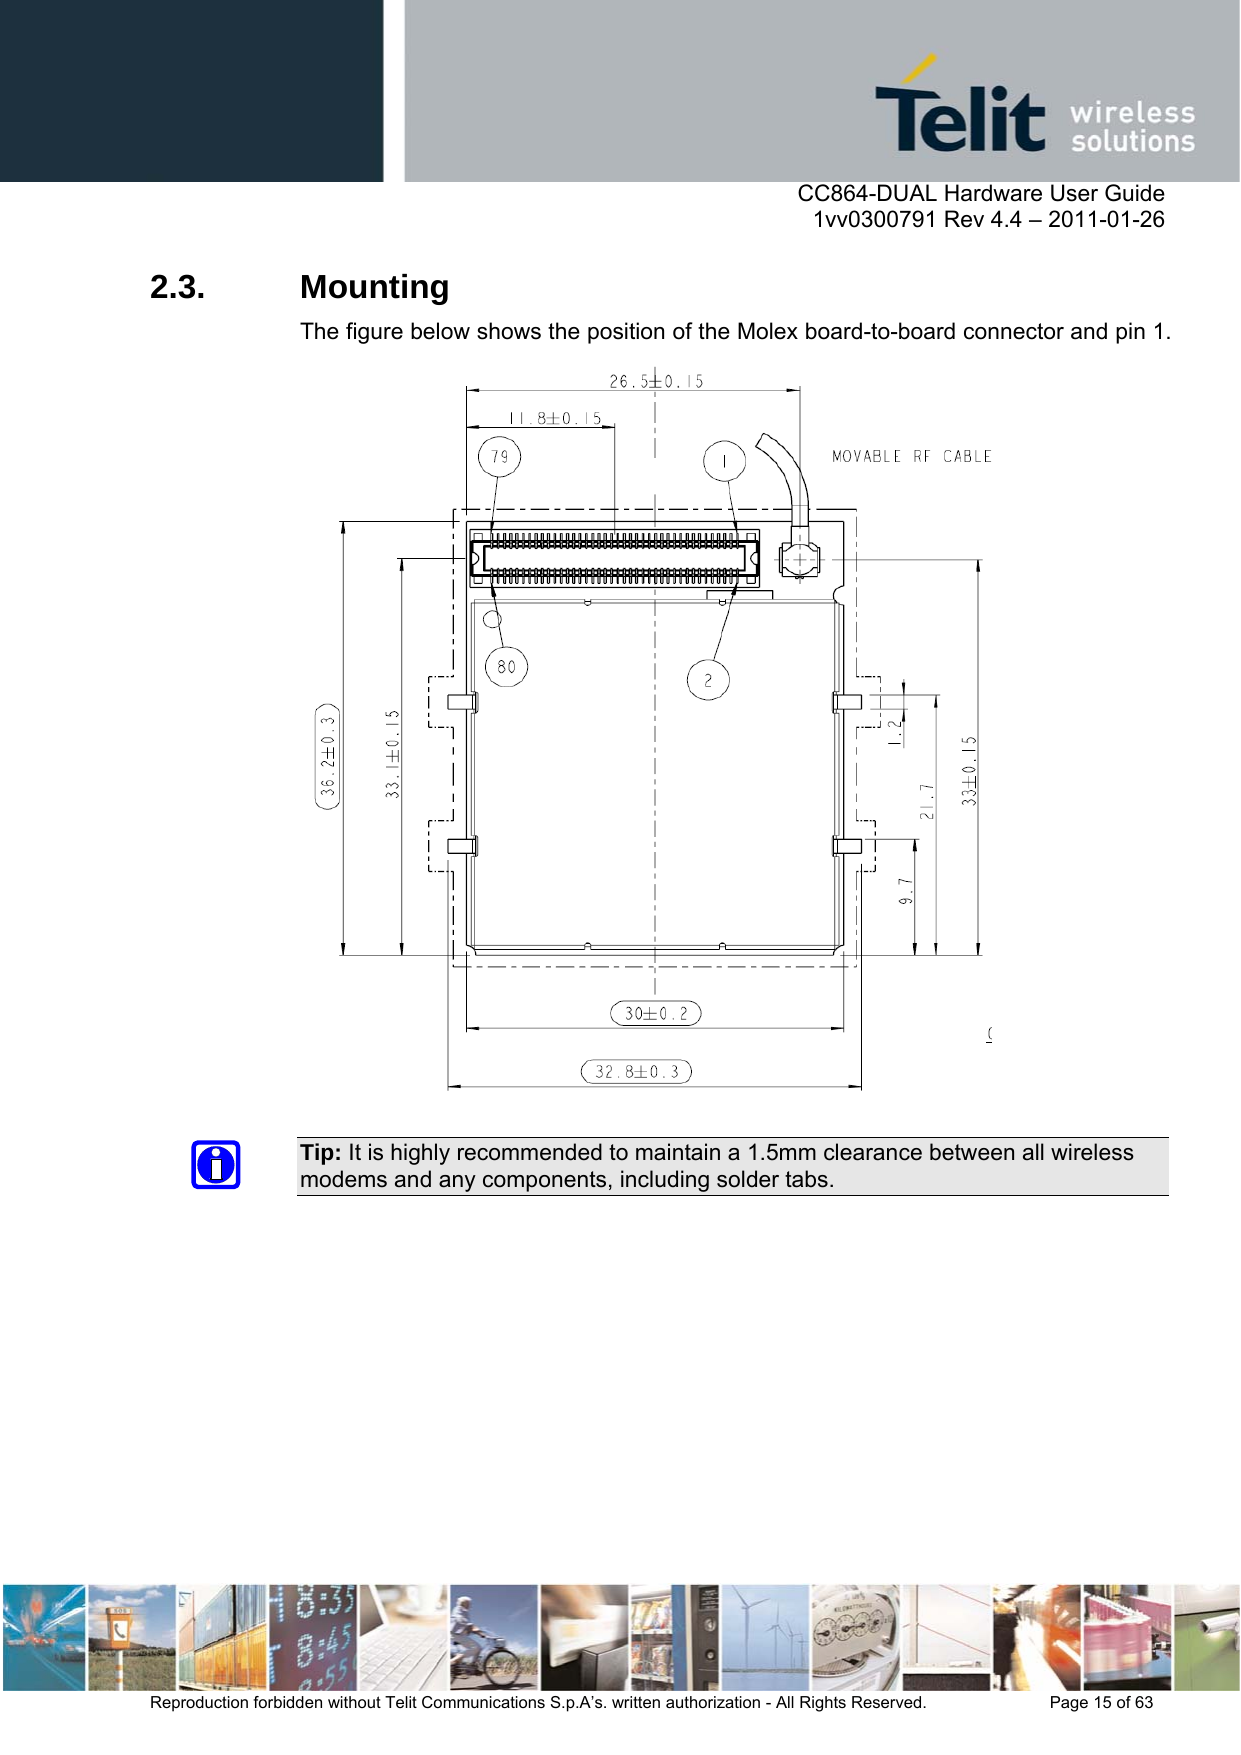      CC864-DUAL Hardware User Guide    1vv0300791 Rev 4.4 – 2011-01-26  Reproduction forbidden without Telit Communications S.p.A’s. written authorization - All Rights Reserved.    Page 15 of 63  2.3. Mounting The figure below shows the position of the Molex board-to-board connector and pin 1.   Tip: It is highly recommended to maintain a 1.5mm clearance between all wireless modems and any components, including solder tabs. 